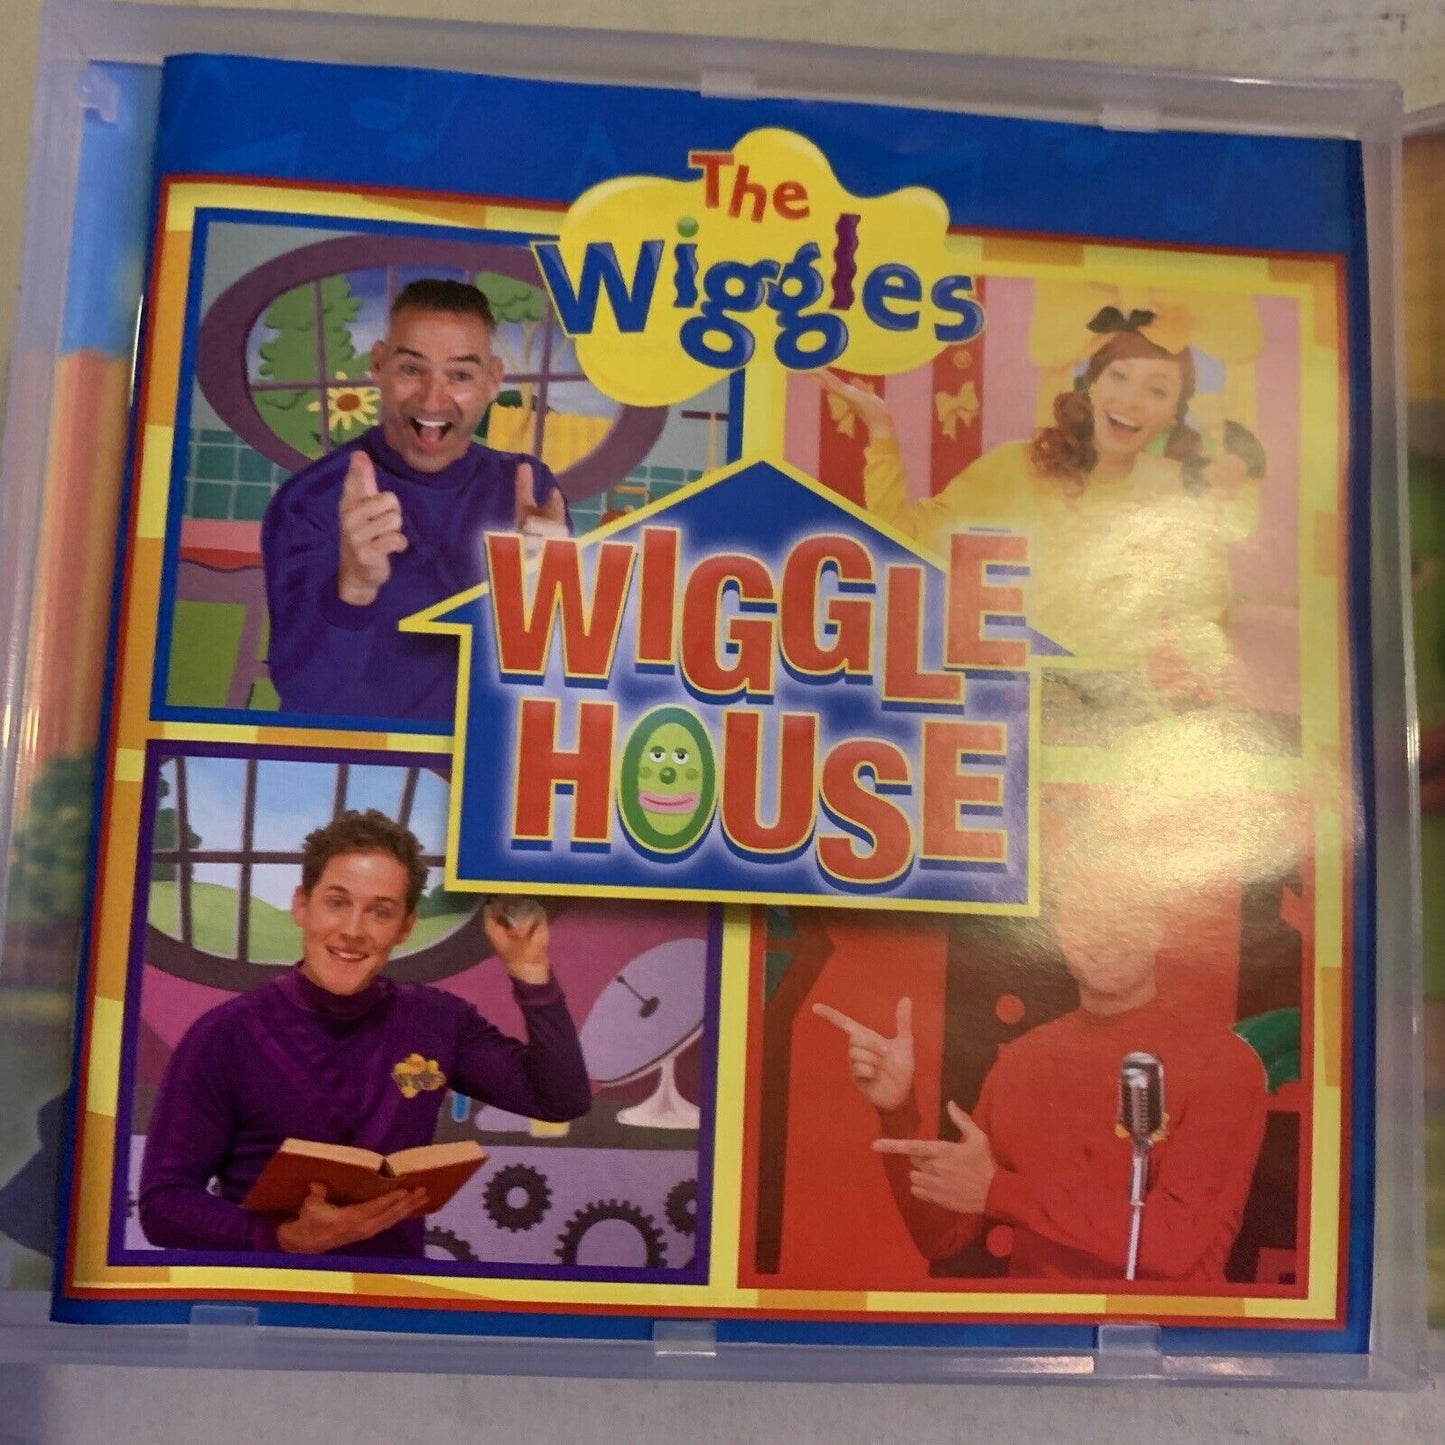 Wiggle House by The Wiggles (CD, Nov-2016, ABC)